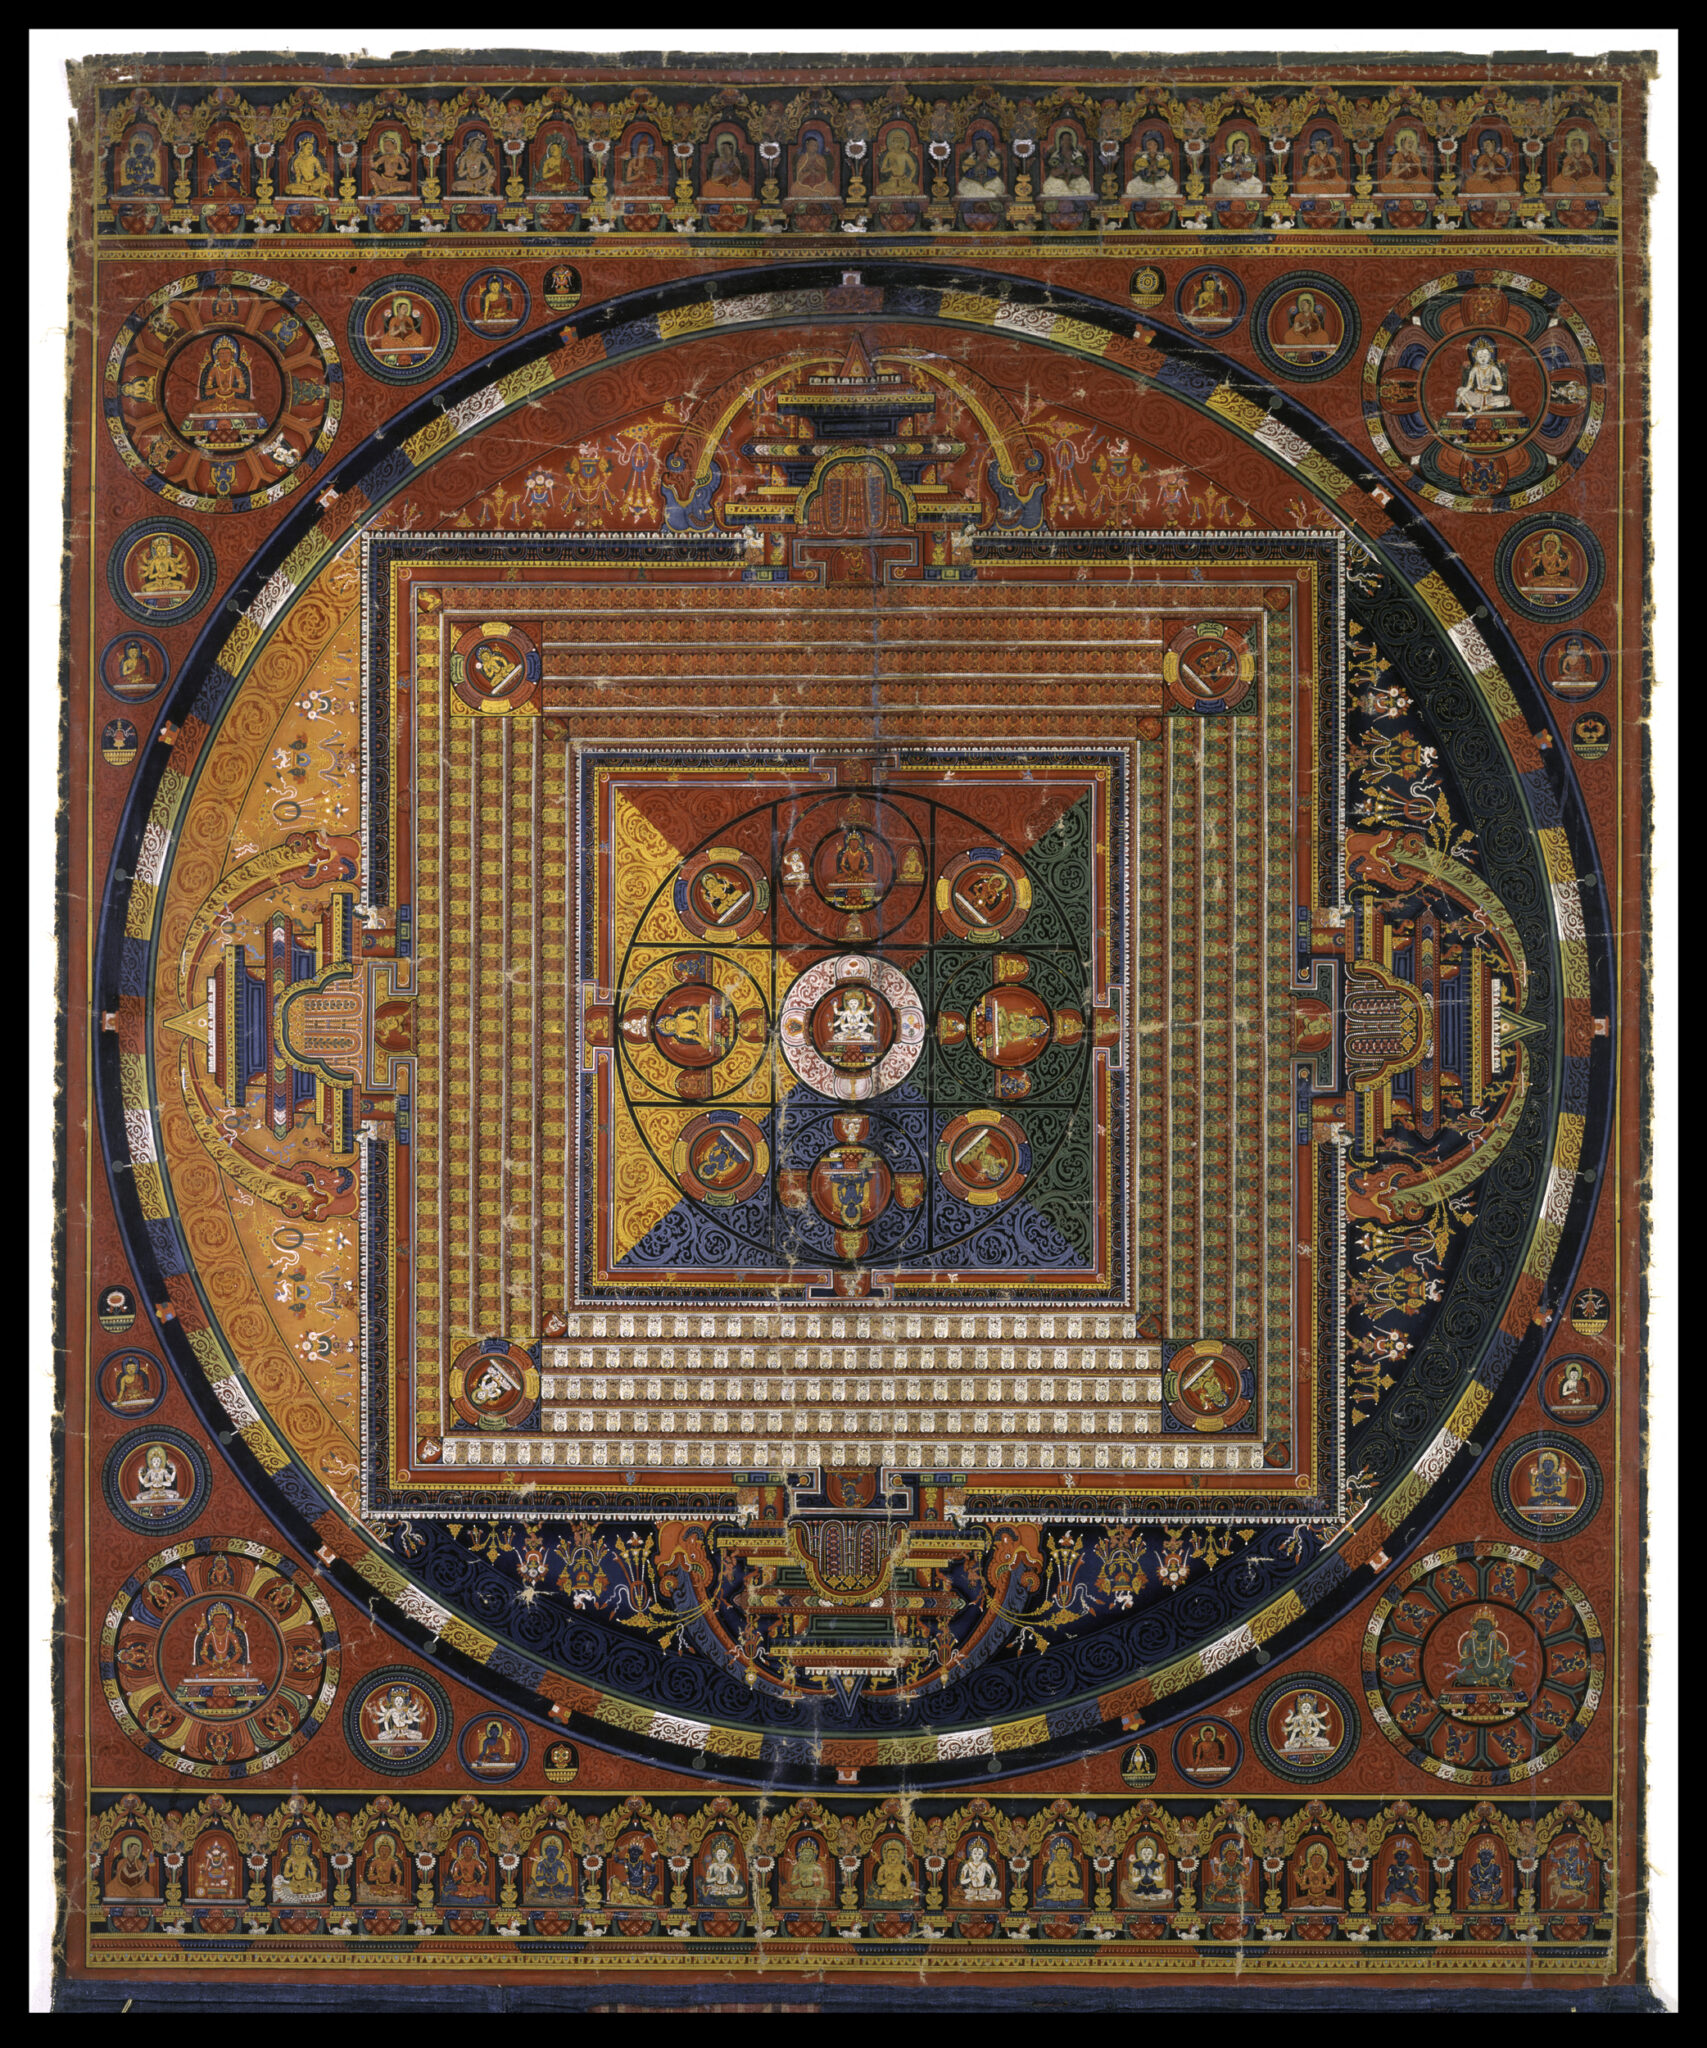 Mandala featuring yellow, red, green, and blue quadrants; arched registers at top and bottom feature miniature seated figures